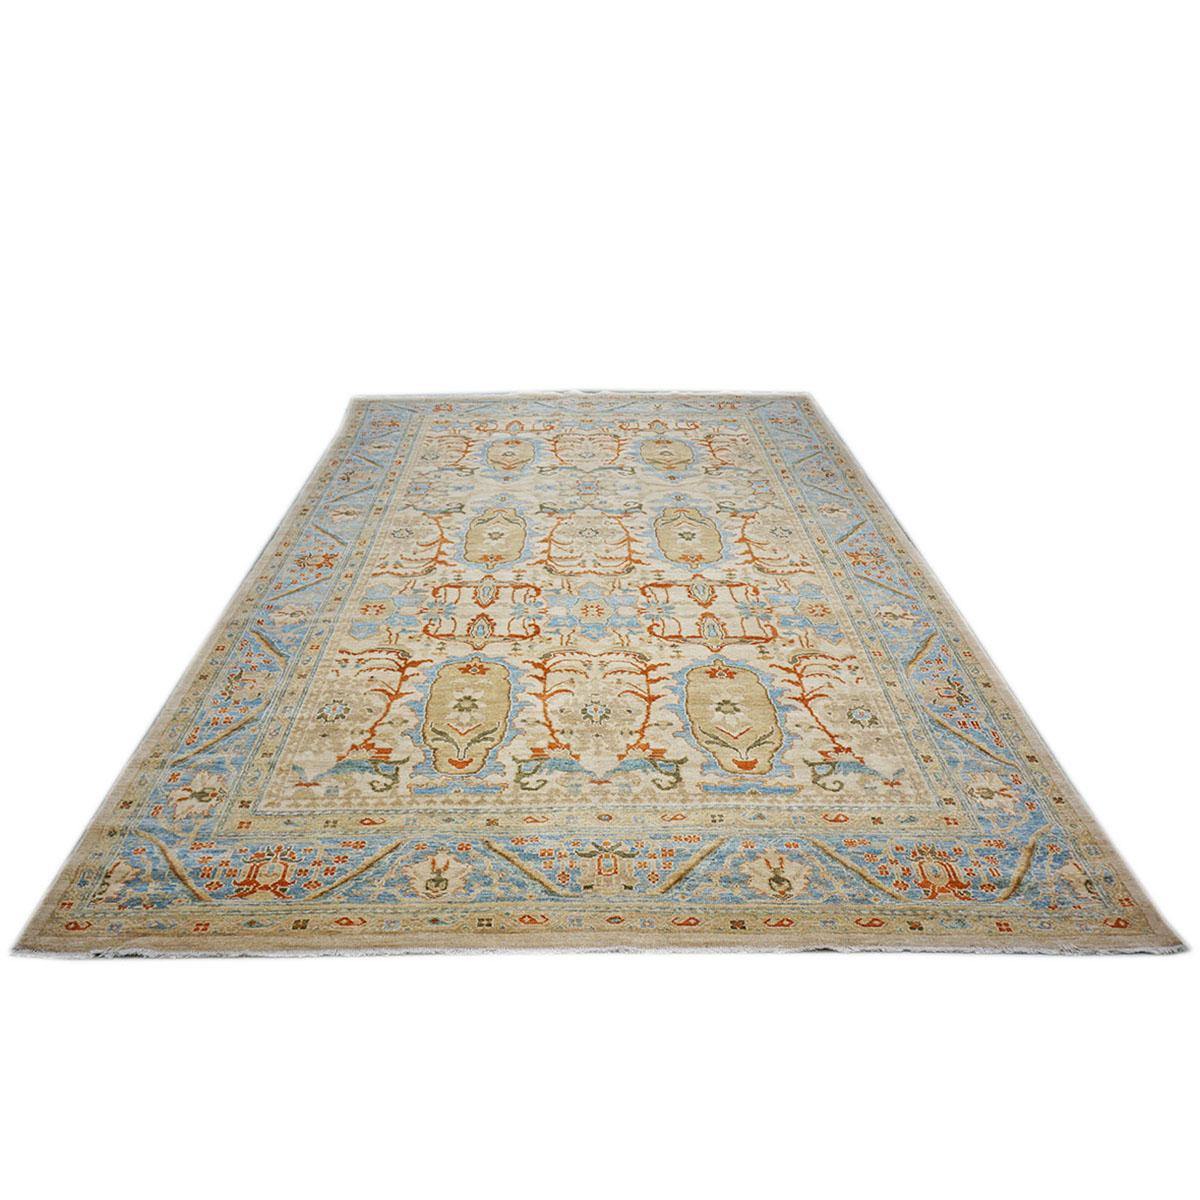 Ashly Fine Rugs presents an antique recreation of an original Persian Sultanabad room-sized area rug. Part of our own previous production, this antique recreation was thought of and created in-house and handmade in Persia by our master weavers. This